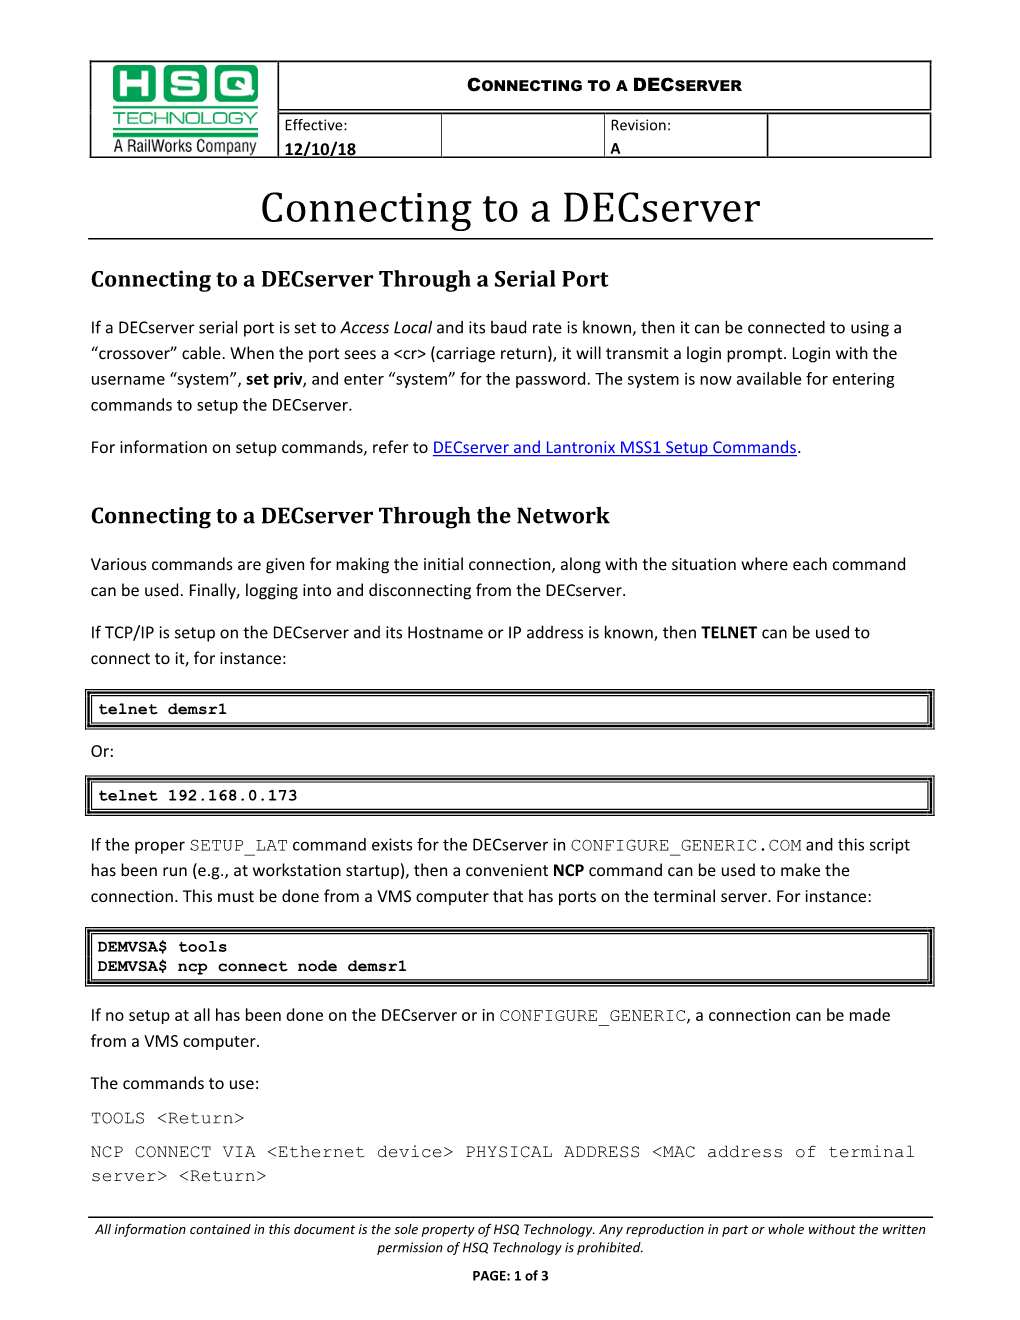 Connecting to a Decserver